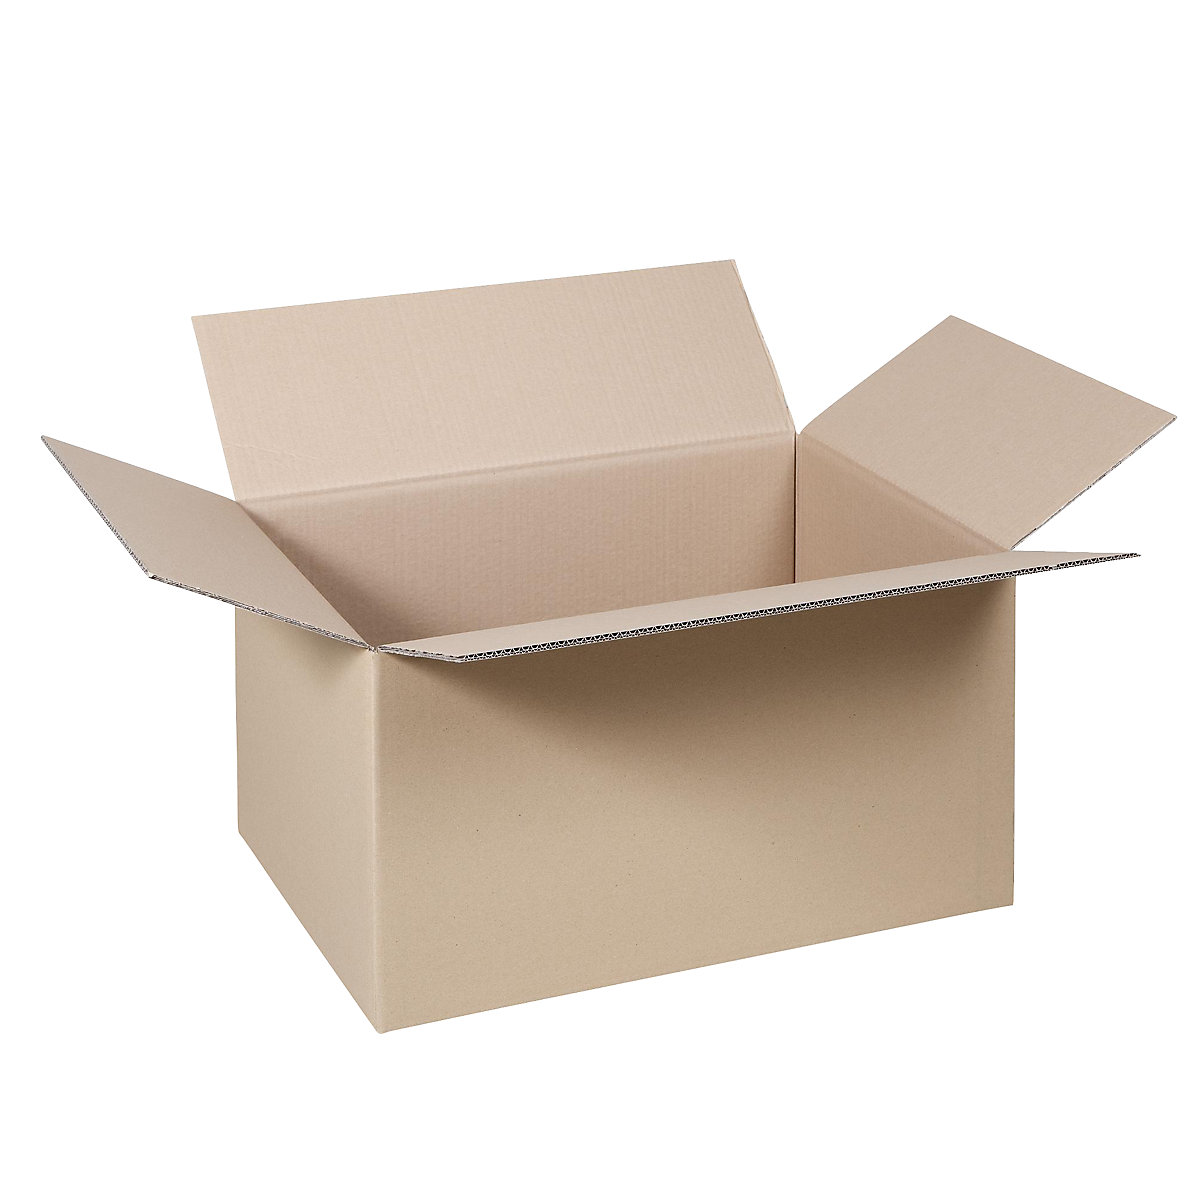 Folding cardboard box, FEFCO 0201, made of double fluted cardboard, internal dimensions 600 x 400 x 300 mm, pack of 50-23